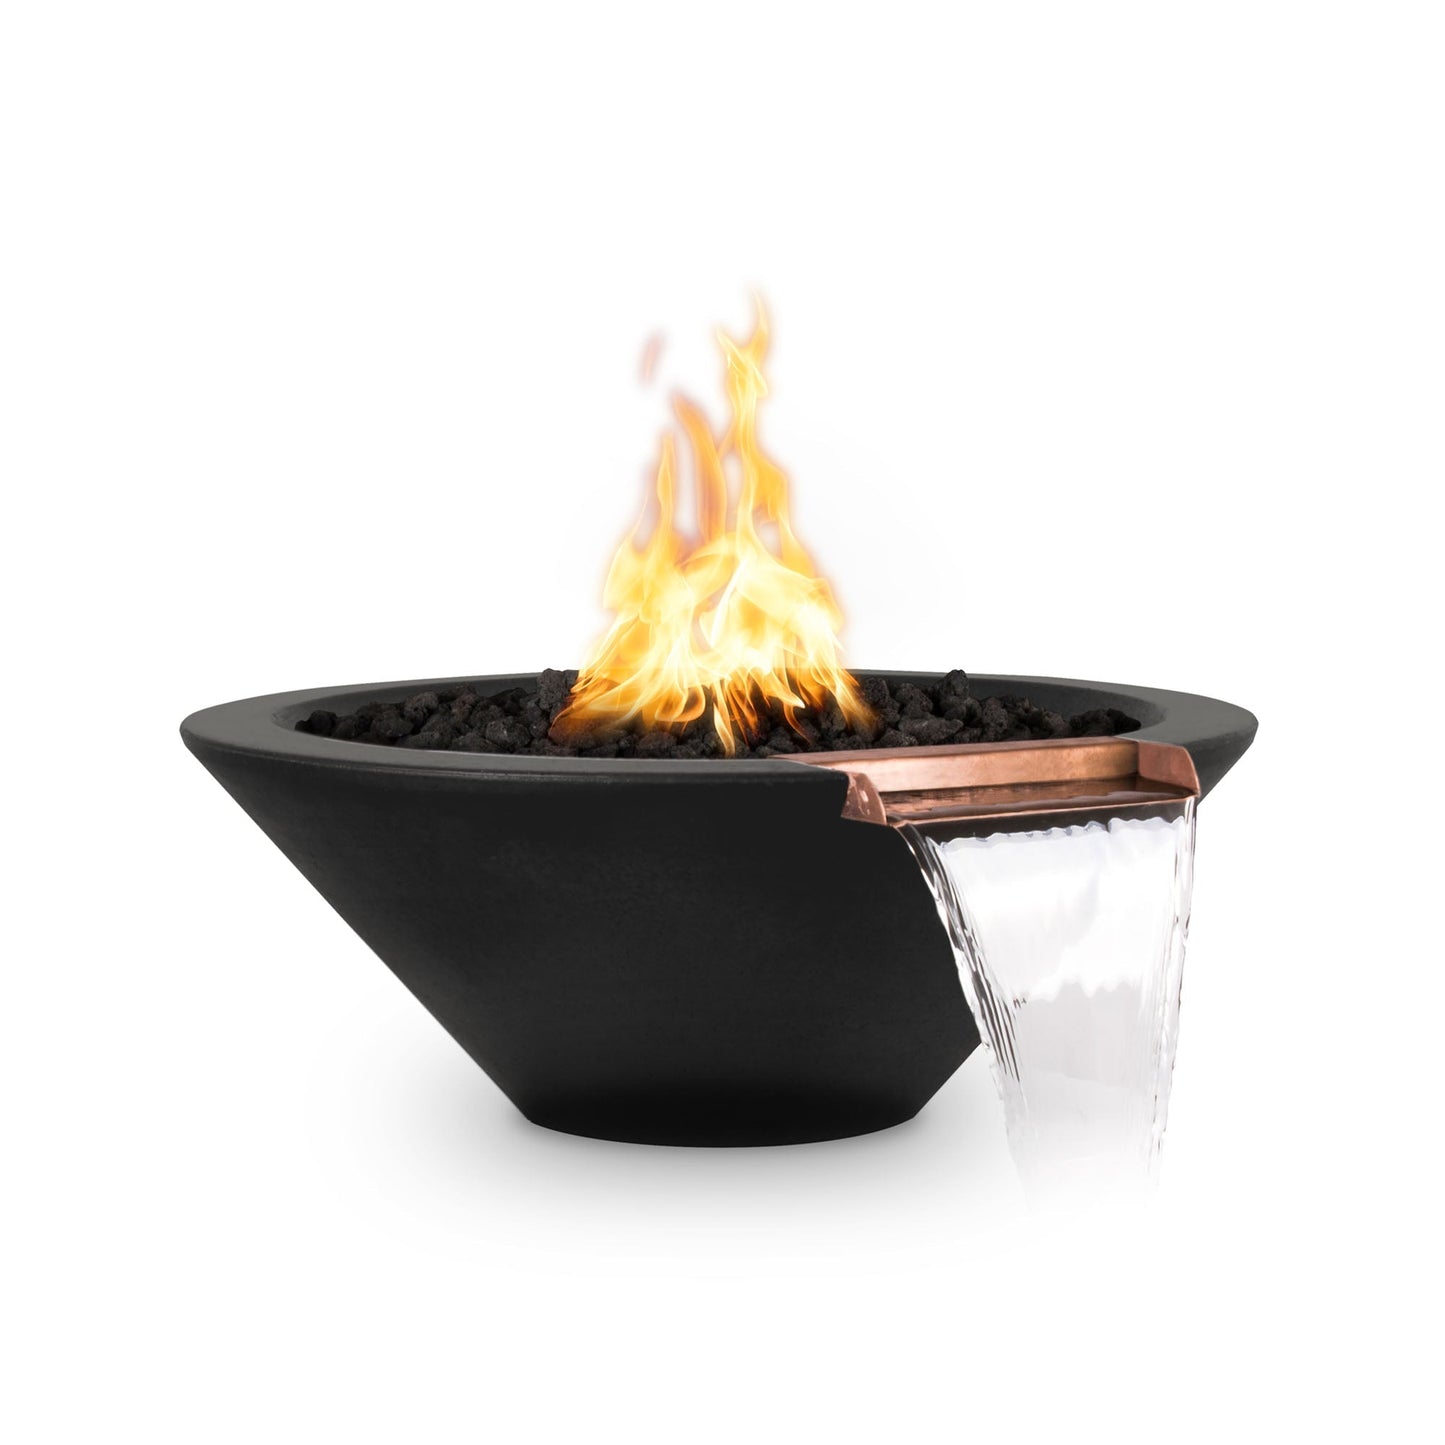 The Outdoor Plus Round Cazo 36" Metallic Slate GFRC Concrete Liquid Propane Fire & Water Bowl with Match Lit with Flame Sense Ignition